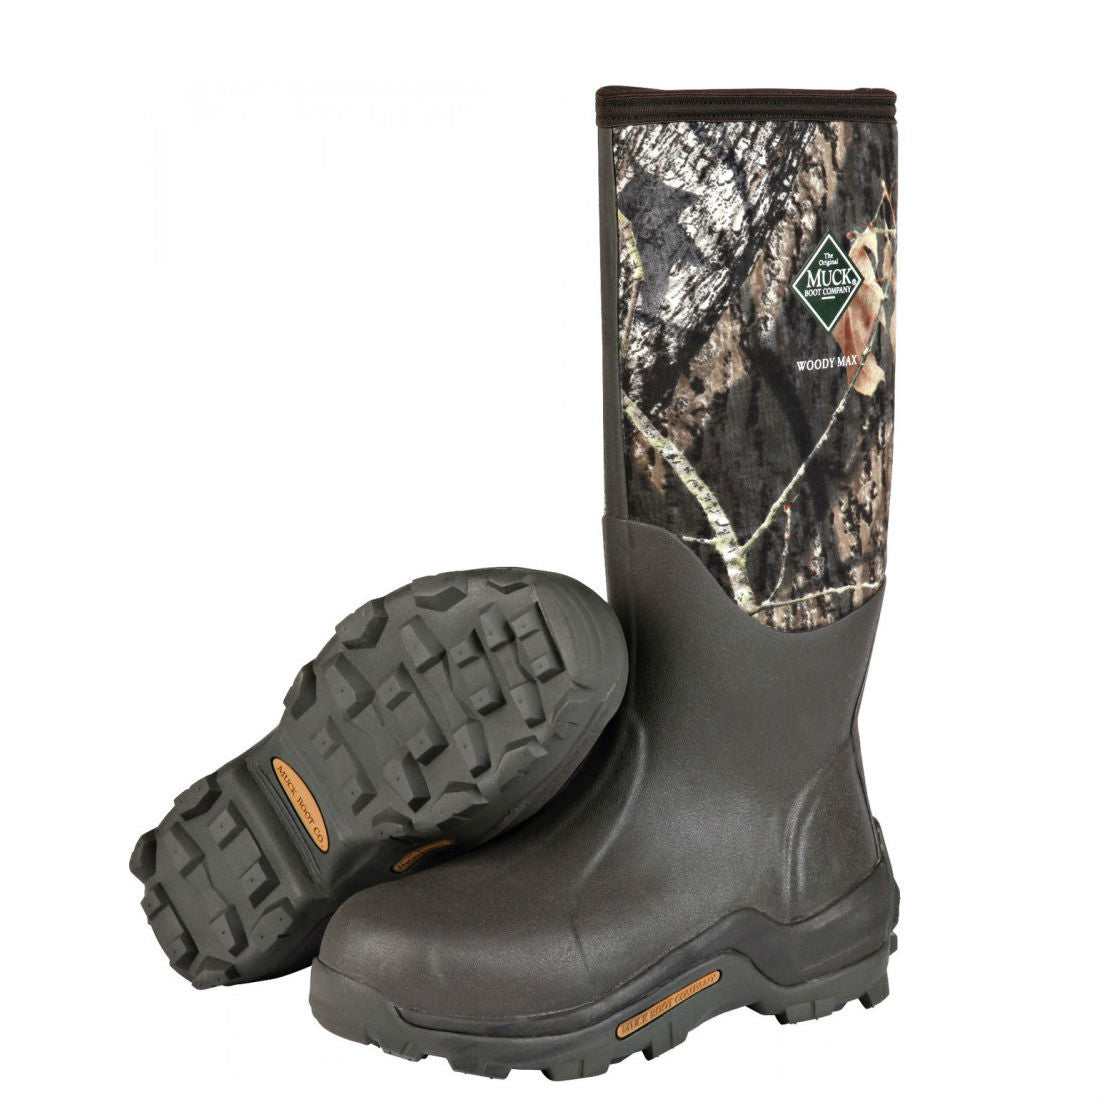 Muck Boots Woody Max Cold-Conditions Hunting Boot - Mossy Oak Break-Up WDM-MOBU - ShoeShackOnline